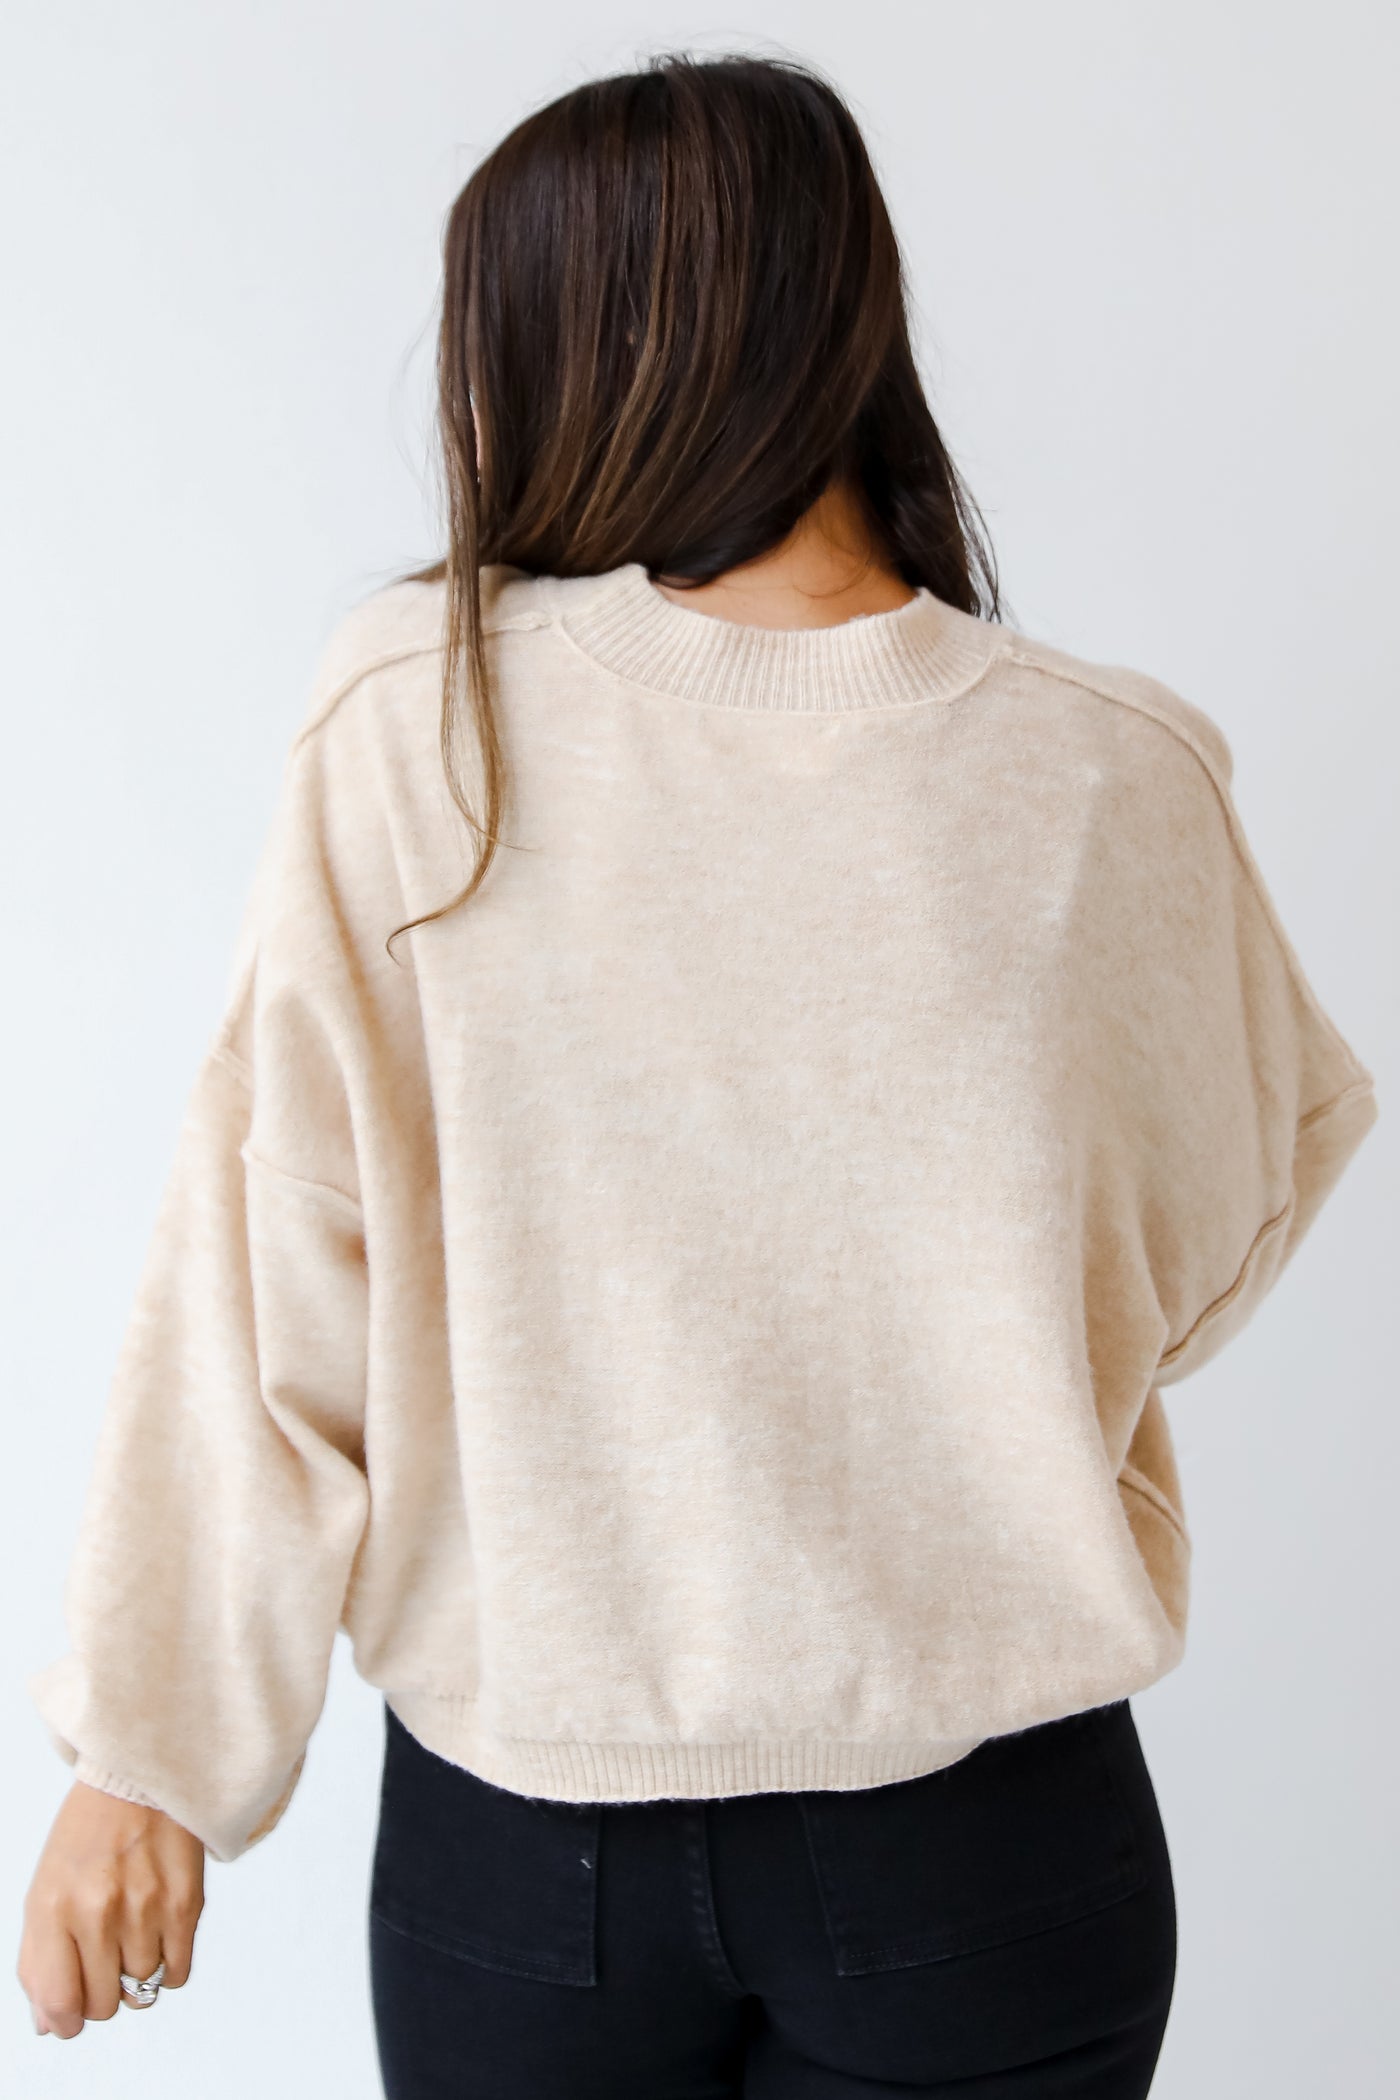 taupe sweater back view